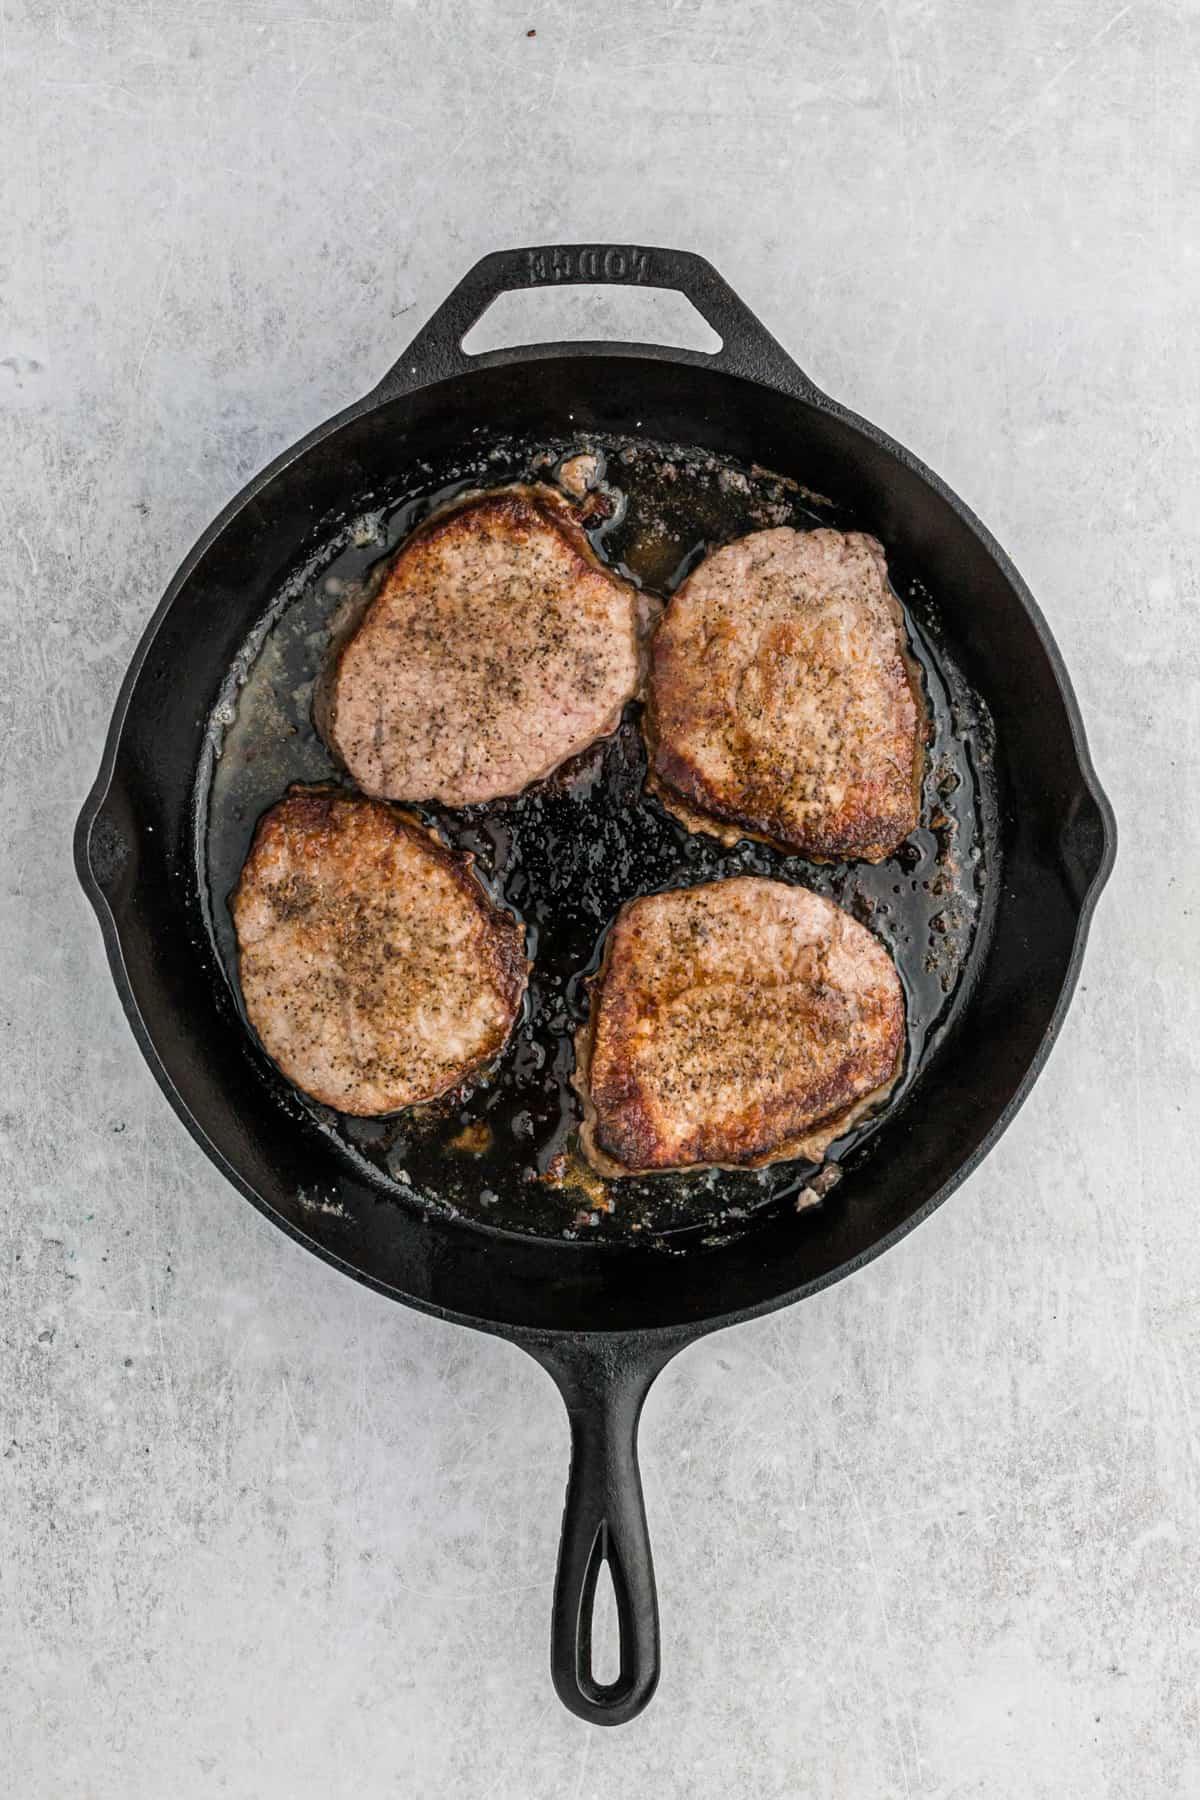 Round steaks sizzling in a large cast iron skillet.